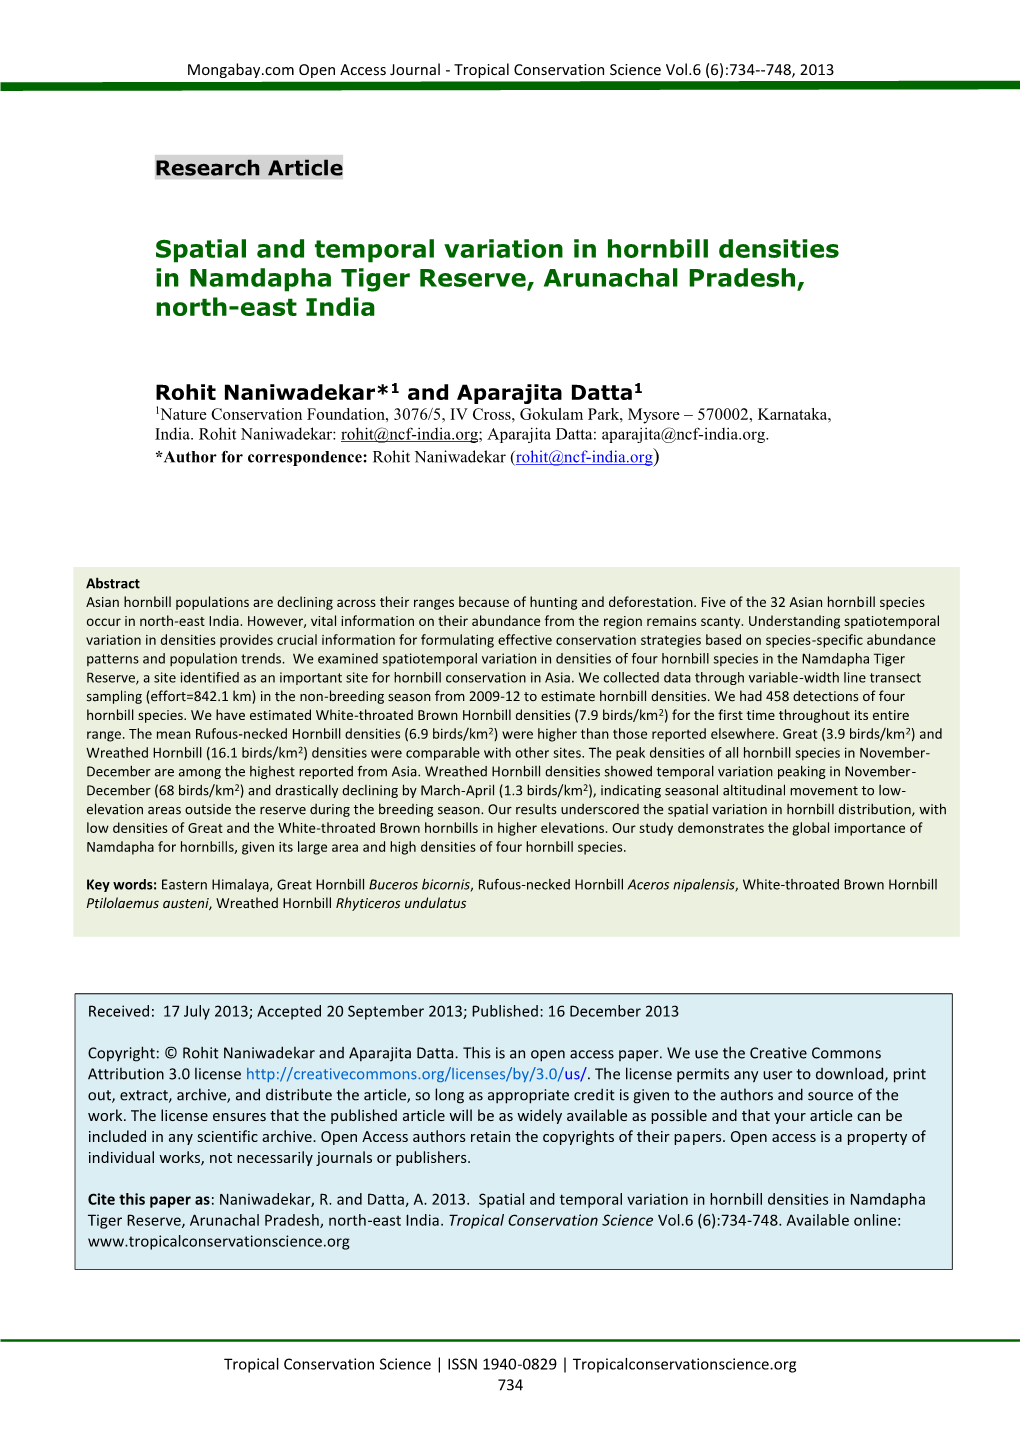 Spatial and Temporal Variation in Hornbill Densities in Namdapha Tiger Reserve, Arunachal Pradesh, North-East India